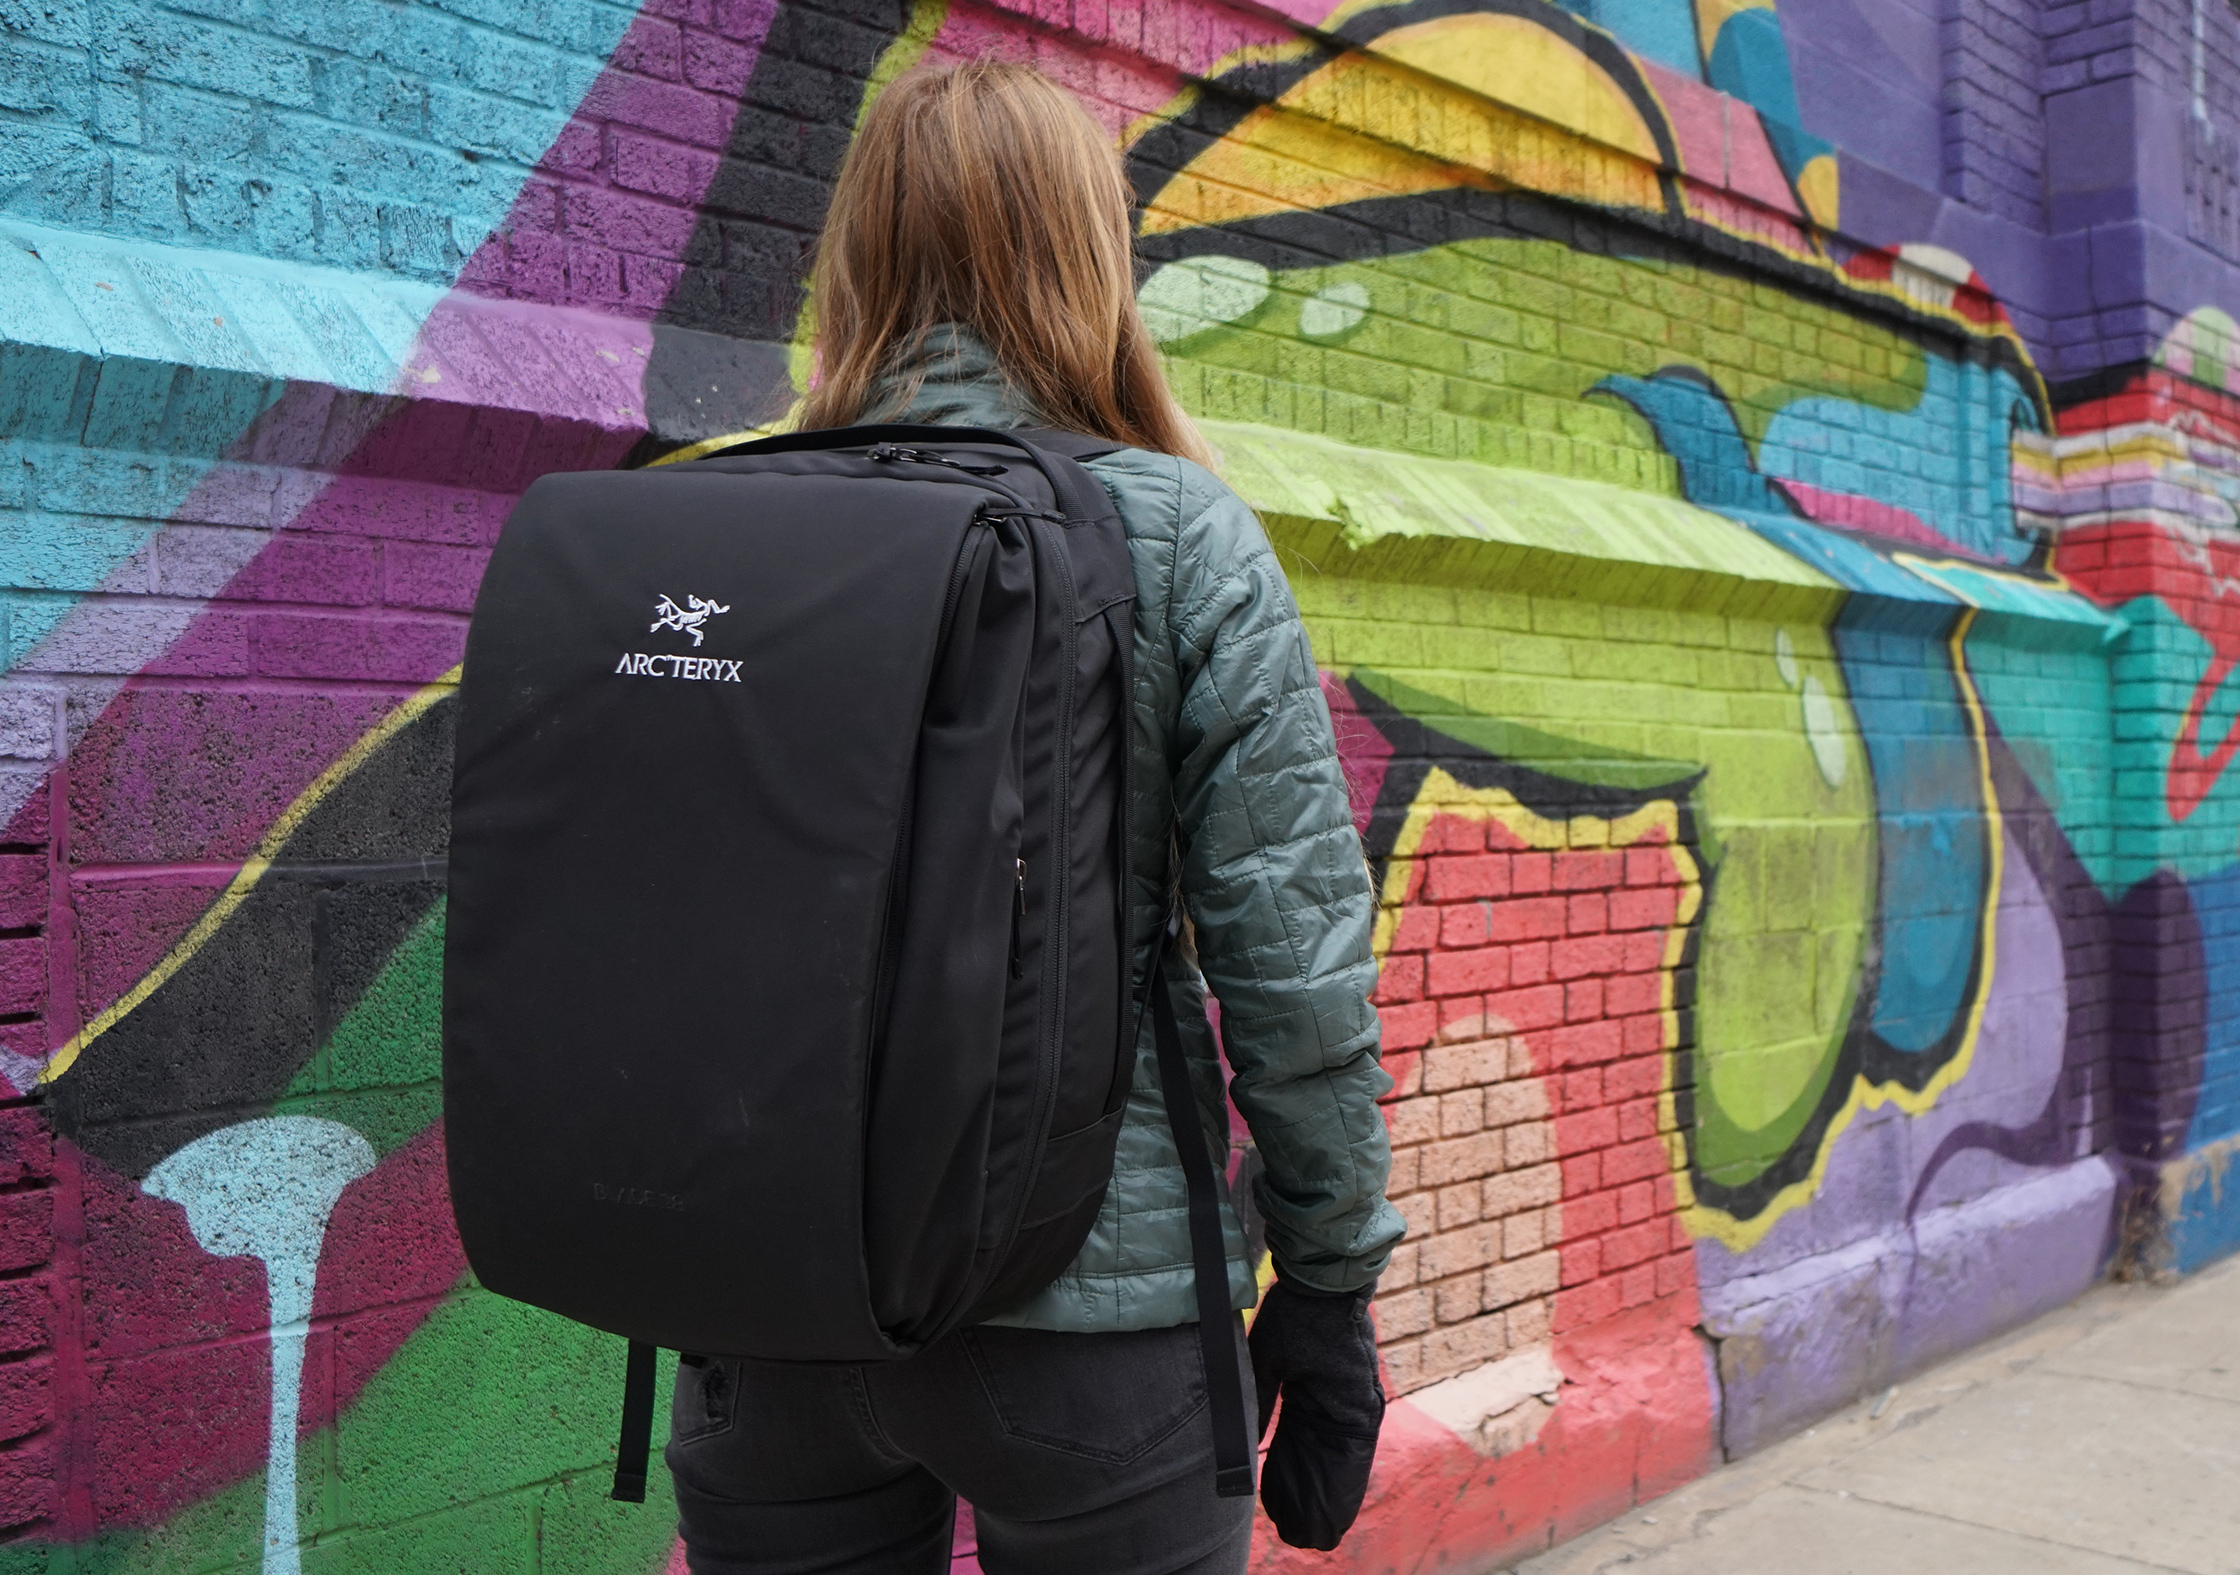 Arc'teryx Blade 28 Backpack In Use